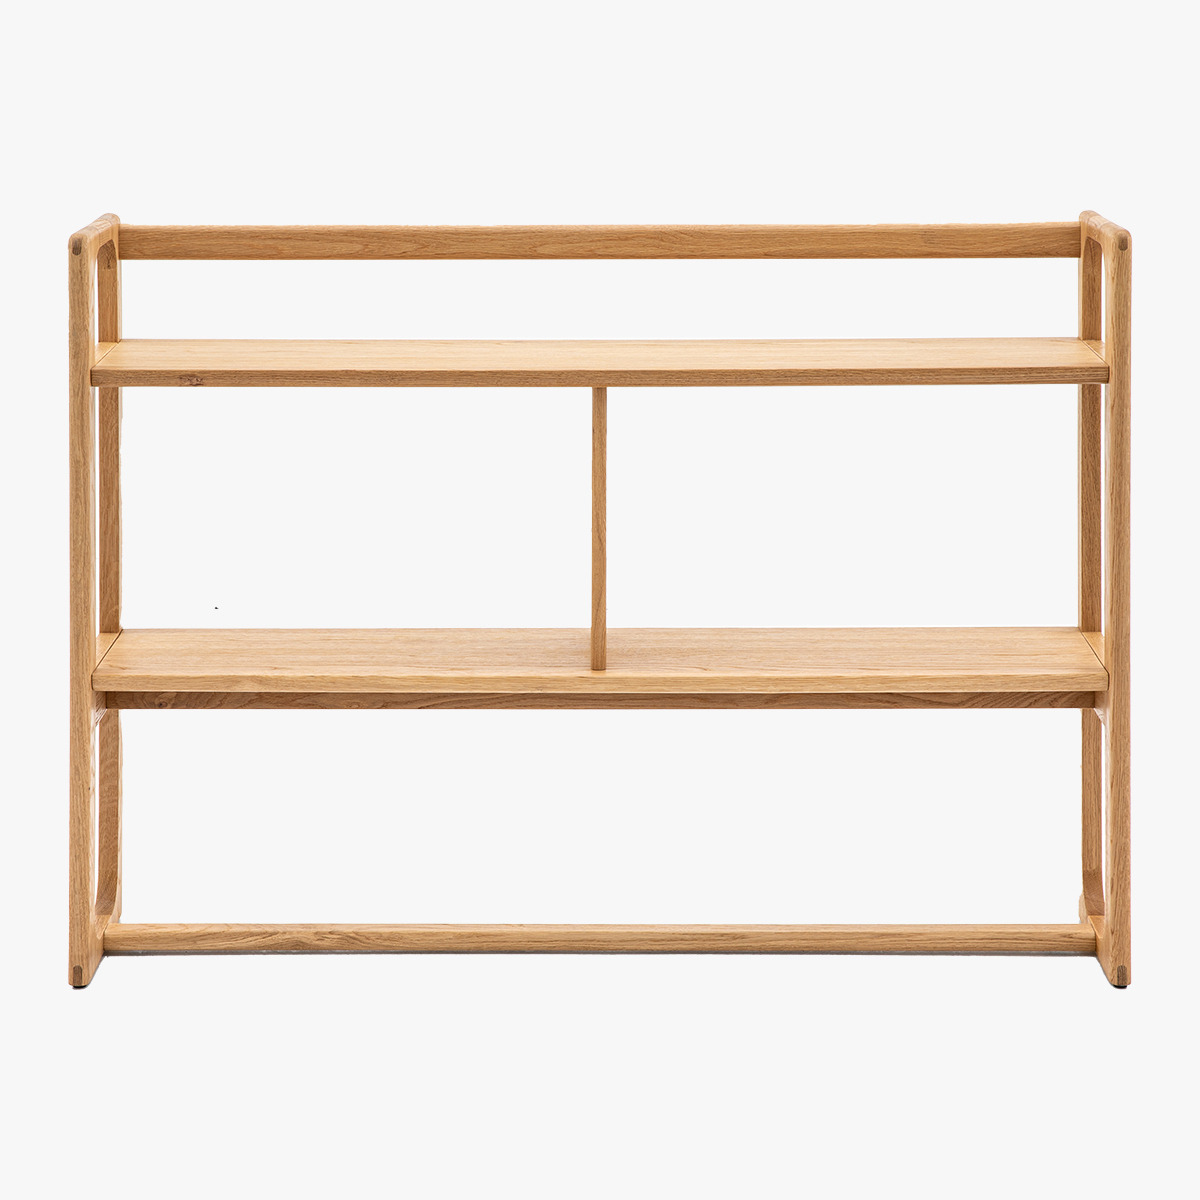 Whittle Open Display Unit in Natural, Medium